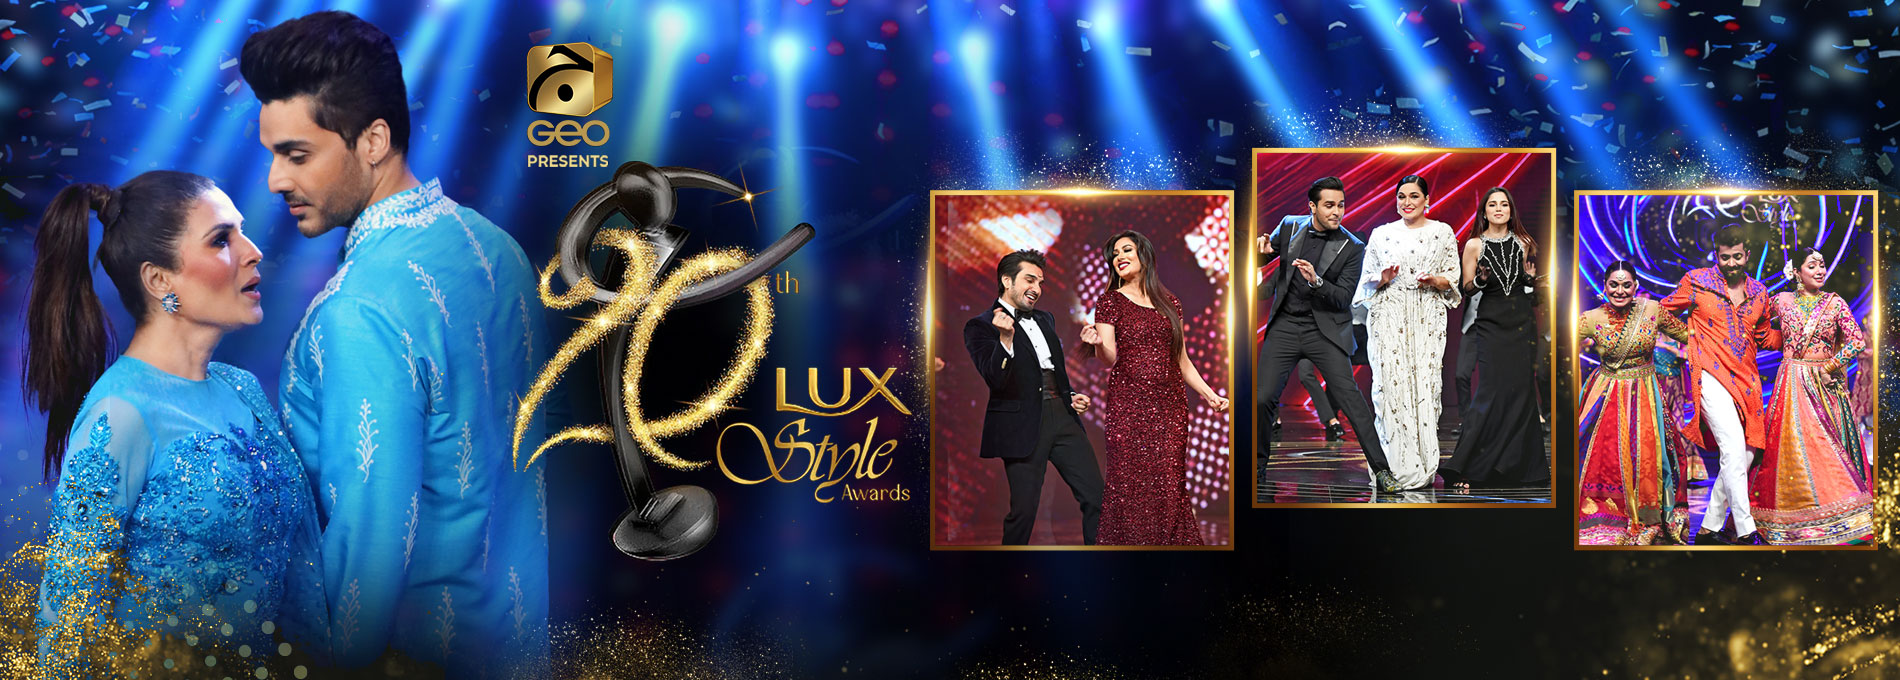 20 Lux Style Awards 2021 - Red Carpet